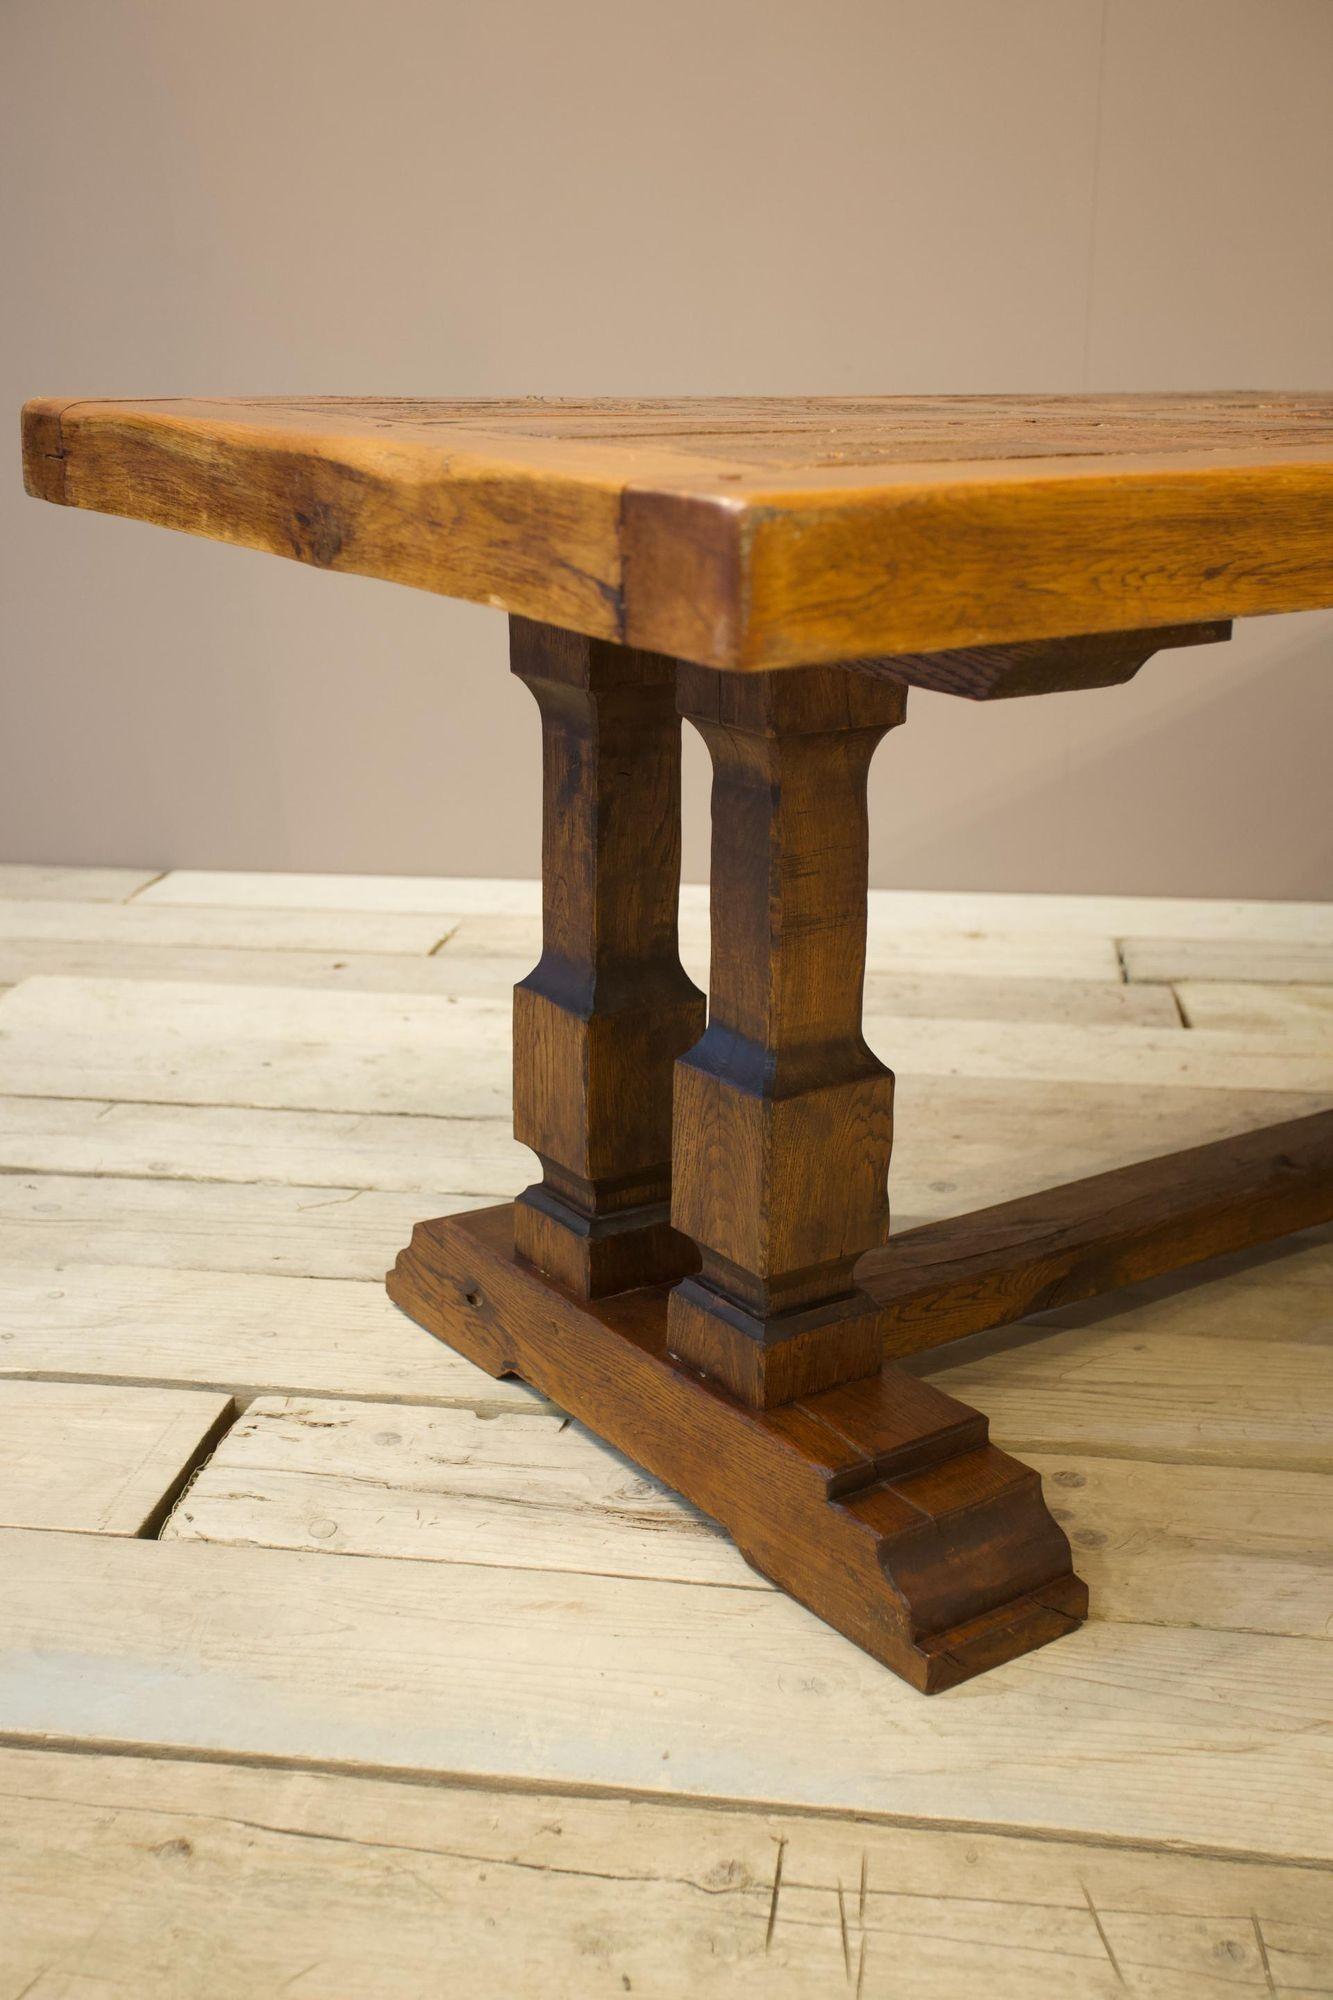 This is a very unusual and interesting brutalist movement dining table. The body is made of solid oak and is inset with had made terracotta bricks that each have a leaf or paw imprint on them. Safe to say this is a very heavy dining table. Great